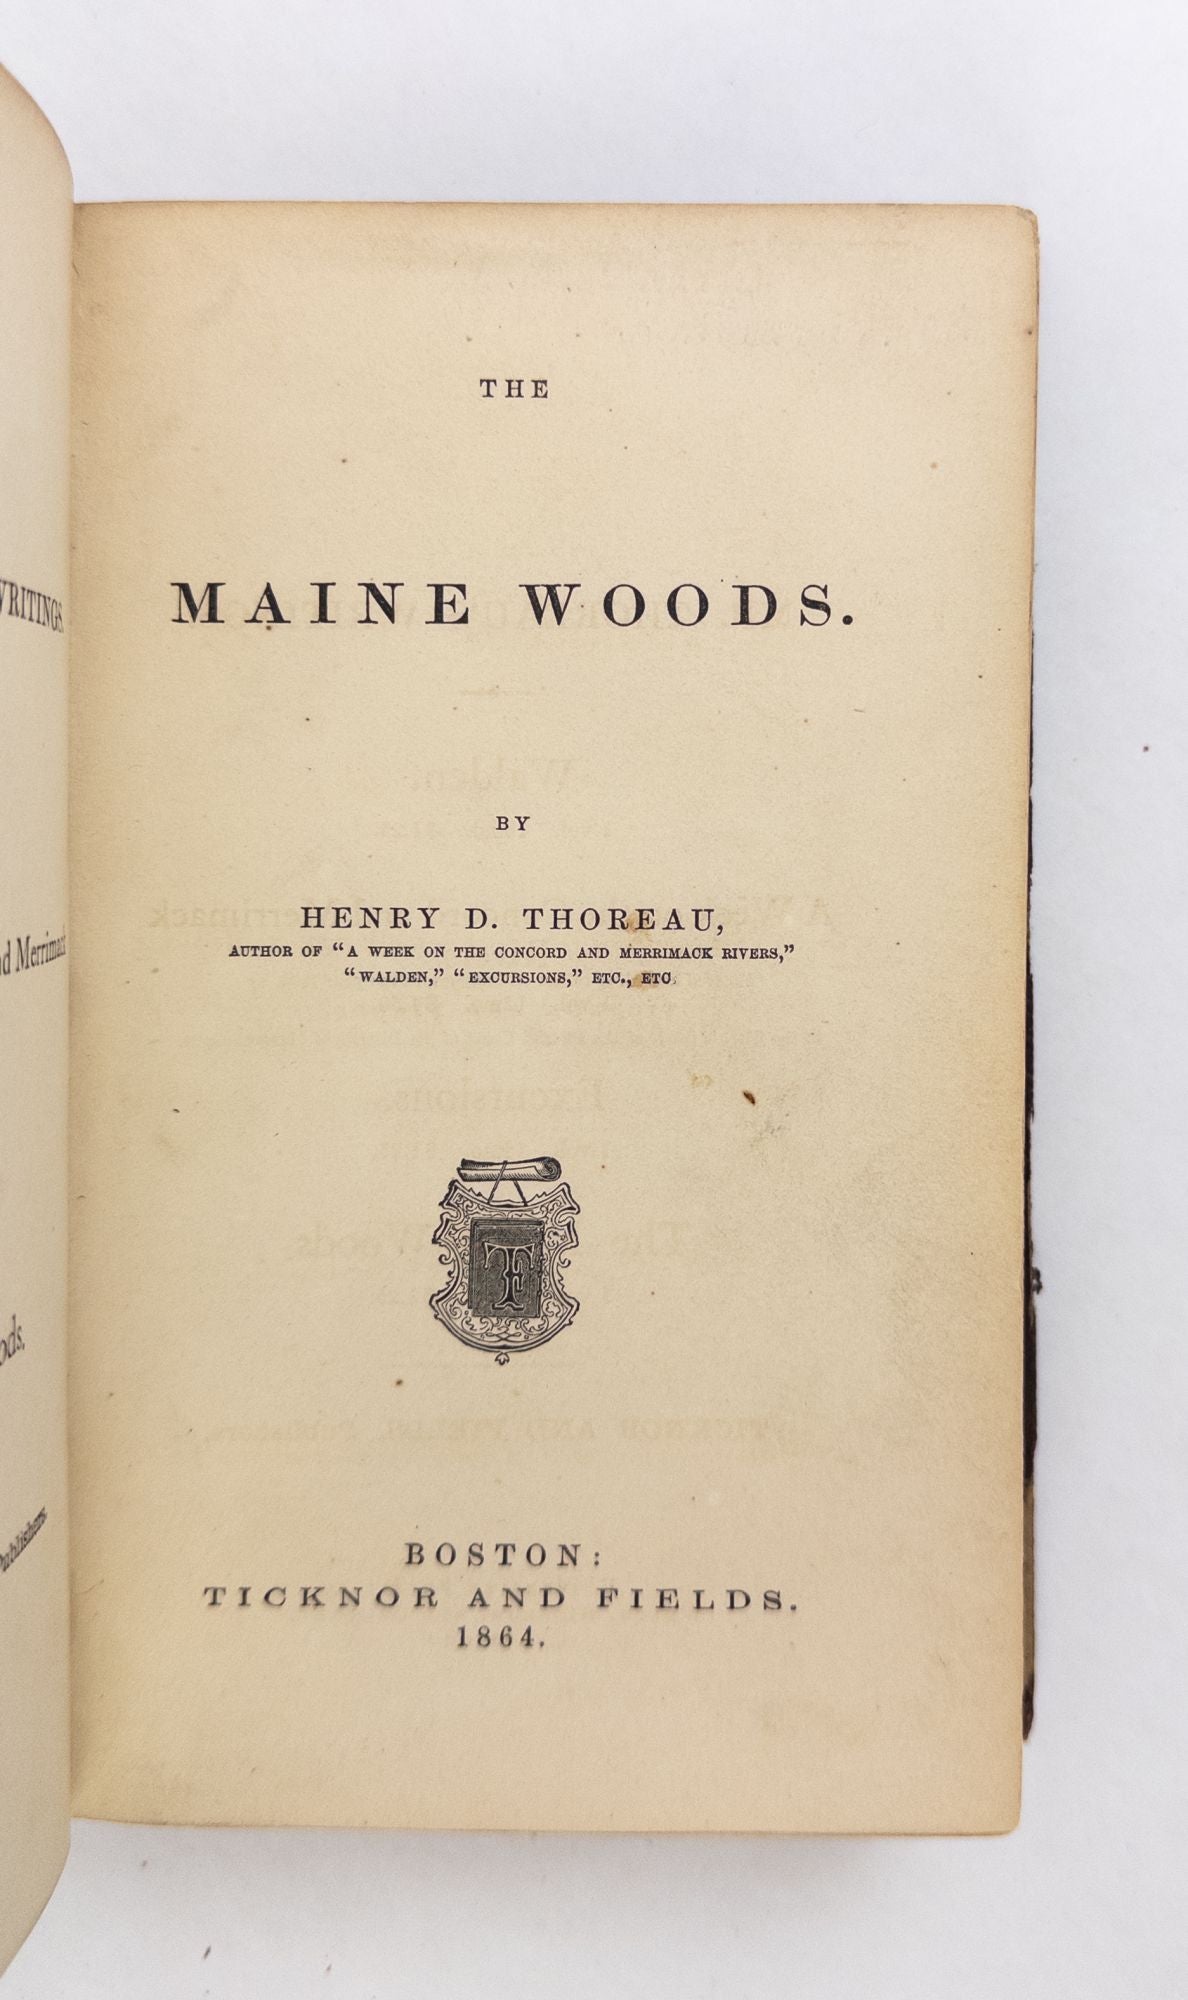 Product Image for THE MAINE WOODS